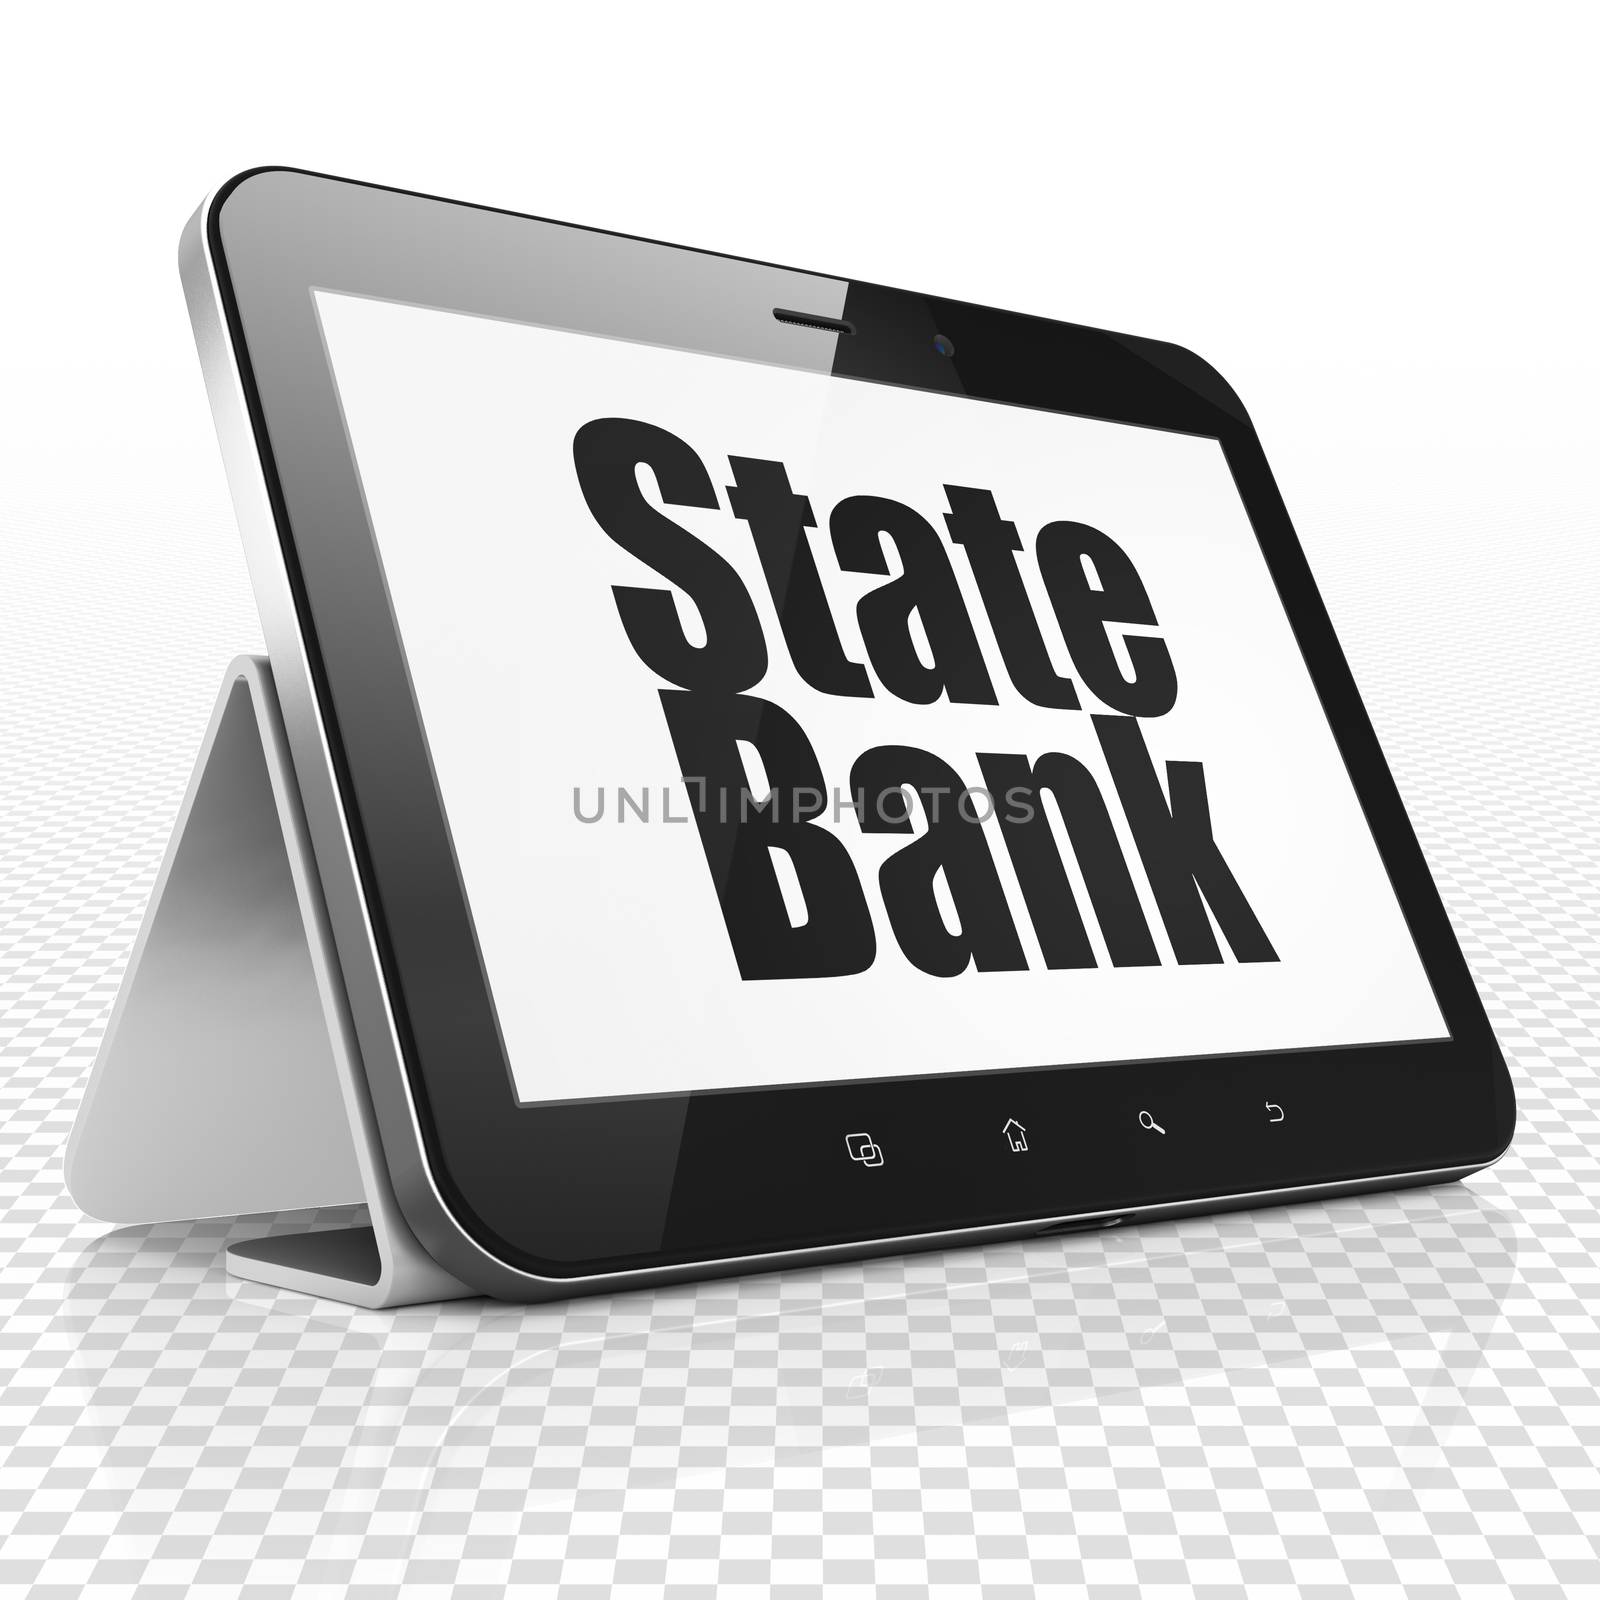 Money concept: Tablet Computer with State Bank on display by maxkabakov